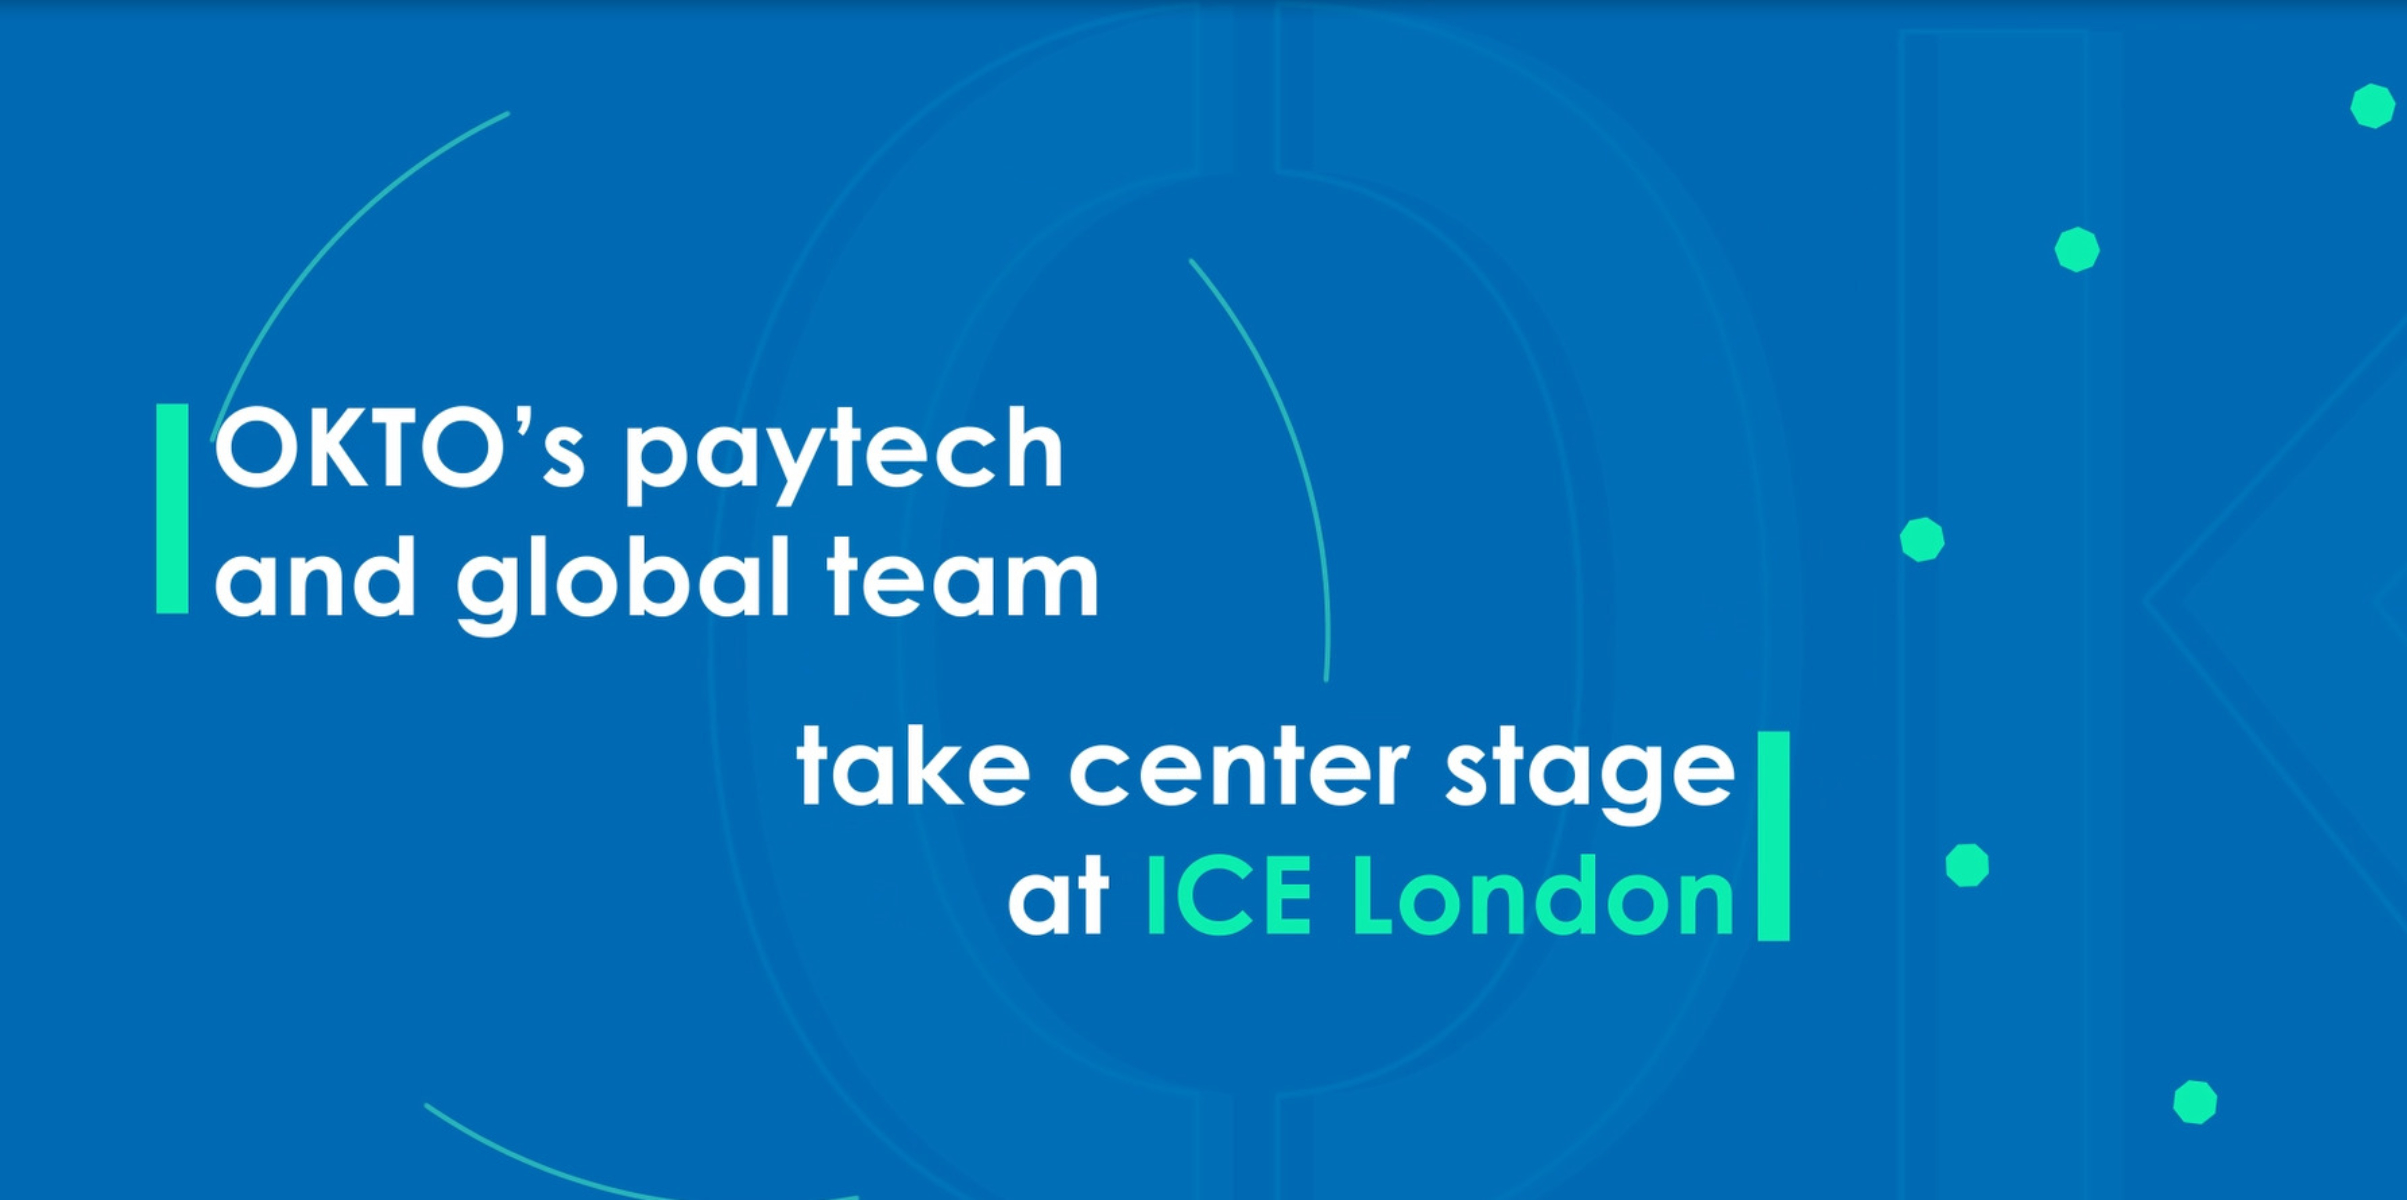 OKTO’s paytech and global team take center stage at ICE London